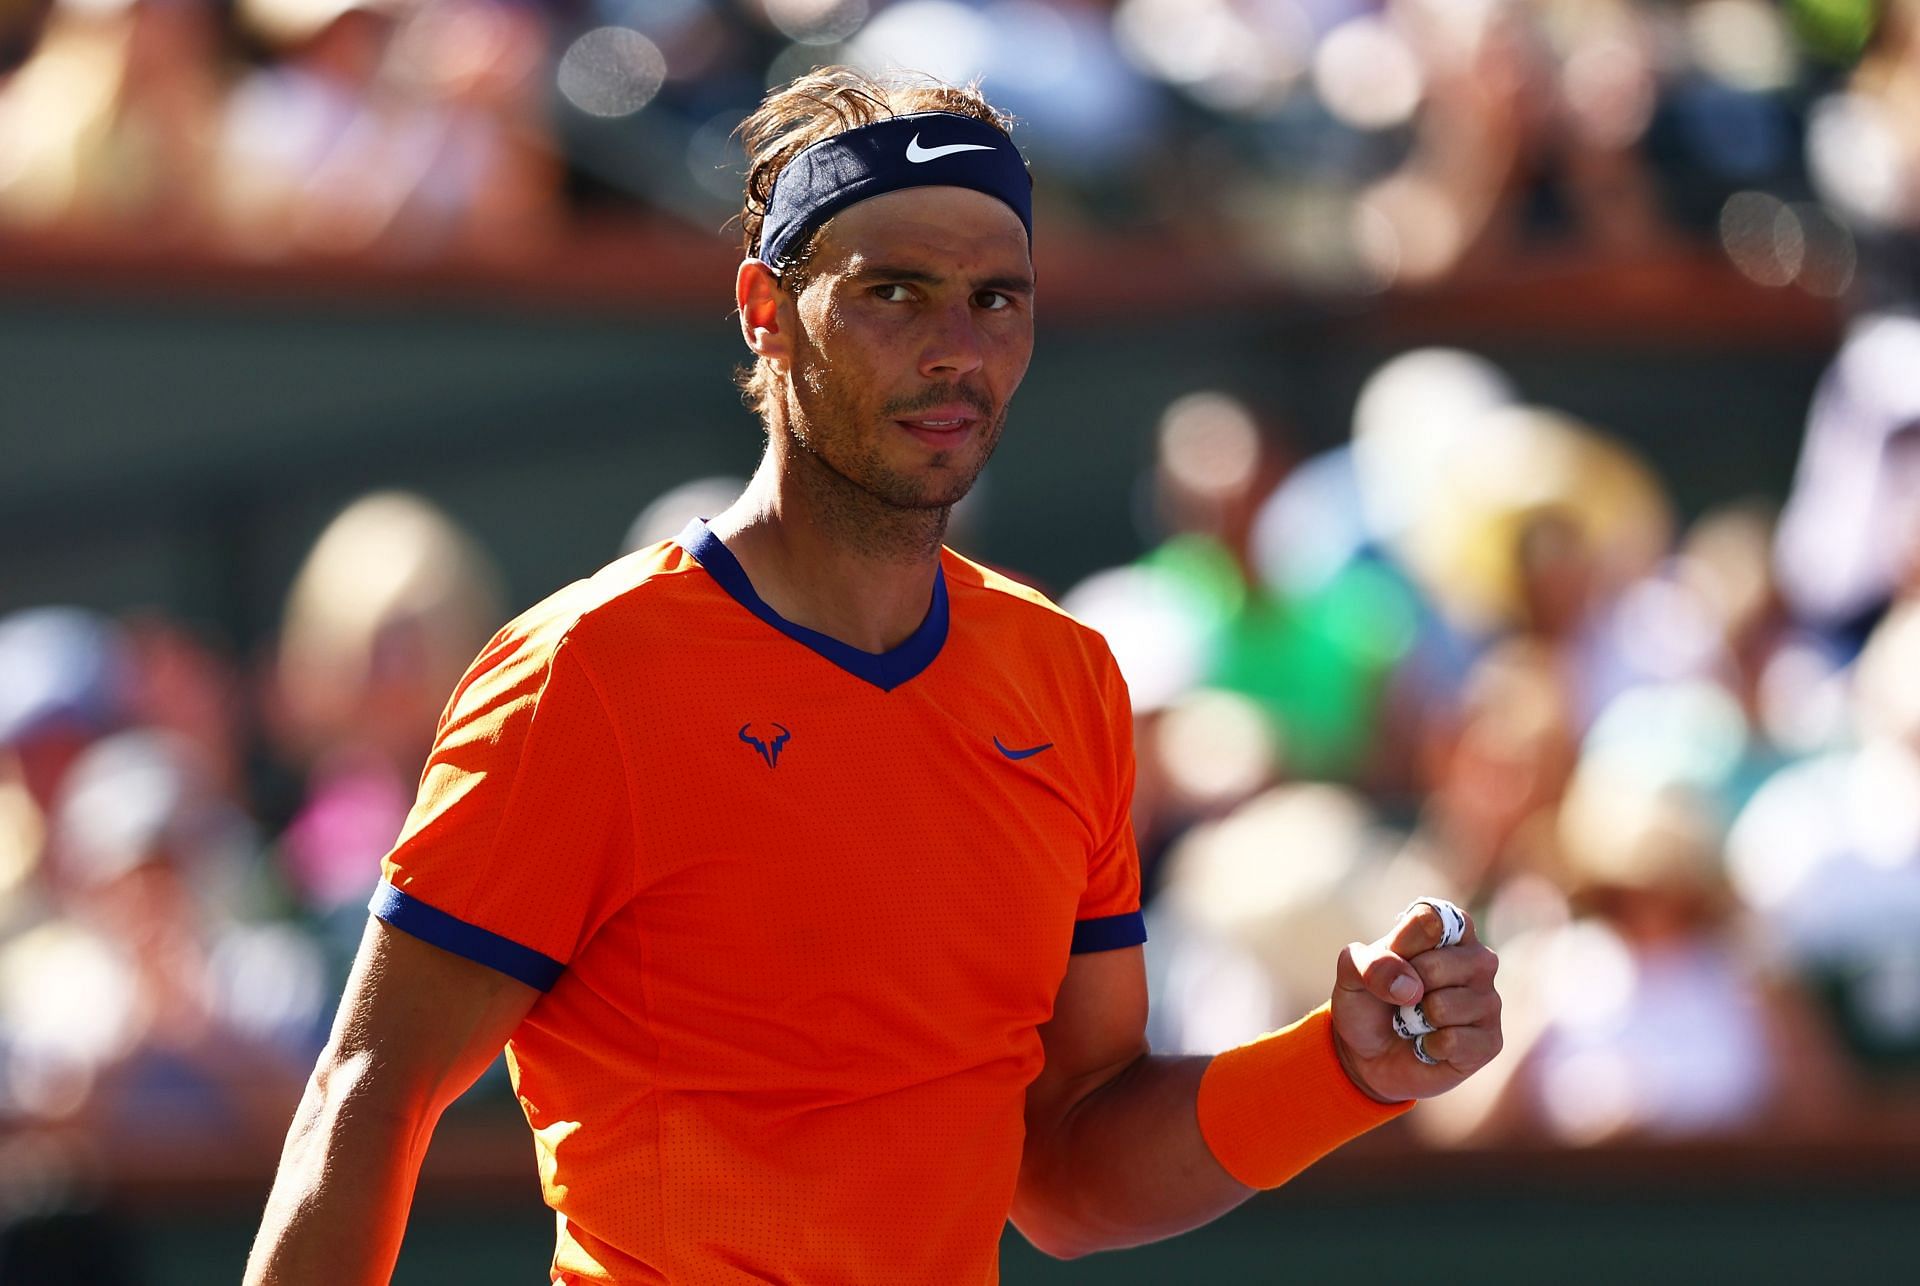 Rafael Nadal takes on Reilly Opelka in the fourth round of the 2022 Indian Wells Masters